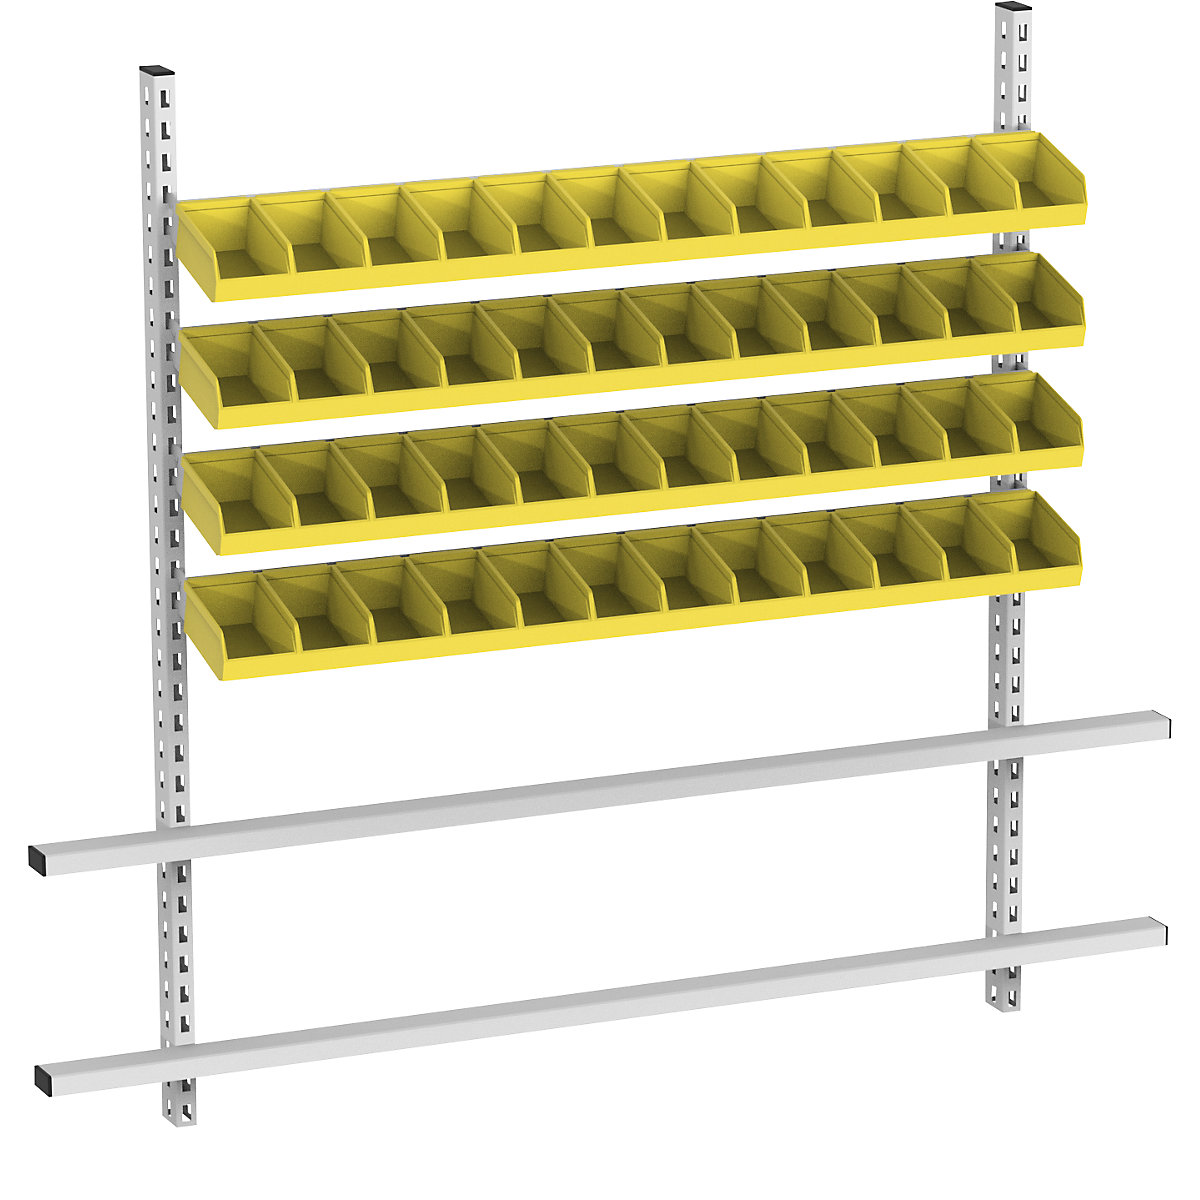 Add-on for table with open fronted storage bins, width 1685 mm, 4 rails with 48 boxes, bins in yellow-2